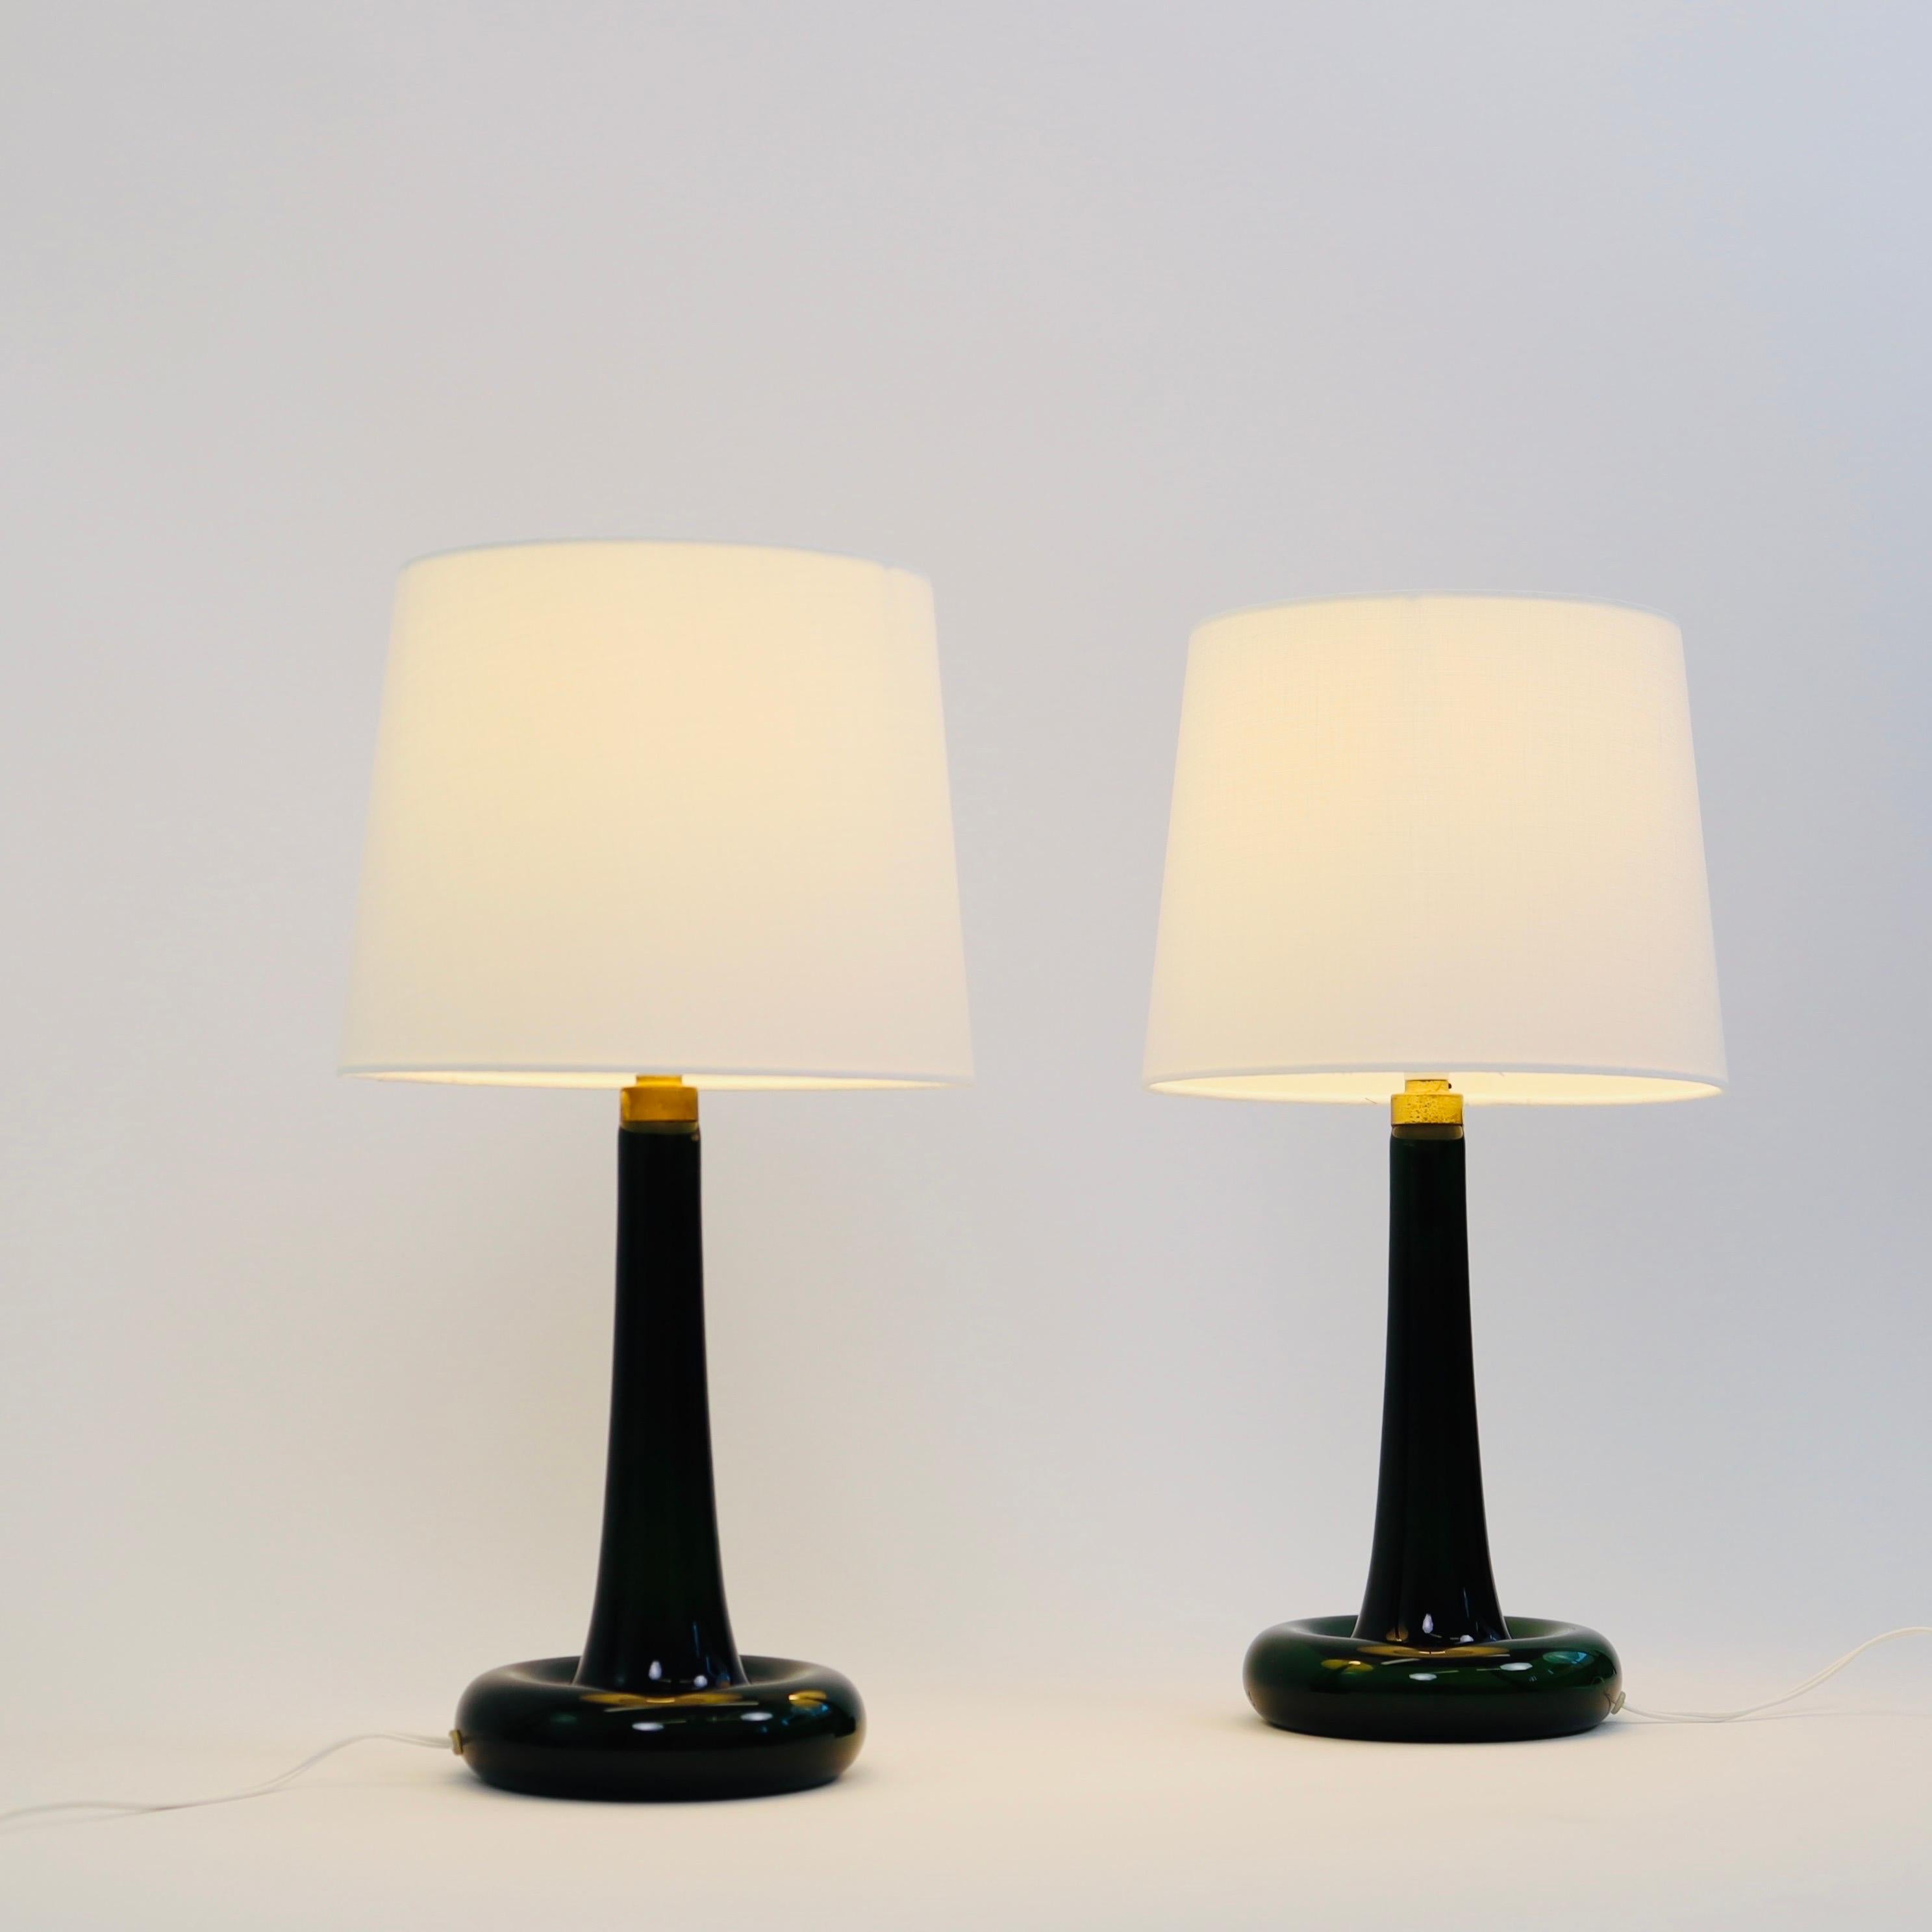 Set of classic dark green desk lamps designed by Michael Bang for Danish Holmegaard Glasværk in 1975. 

* A pair of green glass table lamps with brass details and white fabric shades
* Designer: Michael Bang 
* Style: Fleur
* Producer: Royal